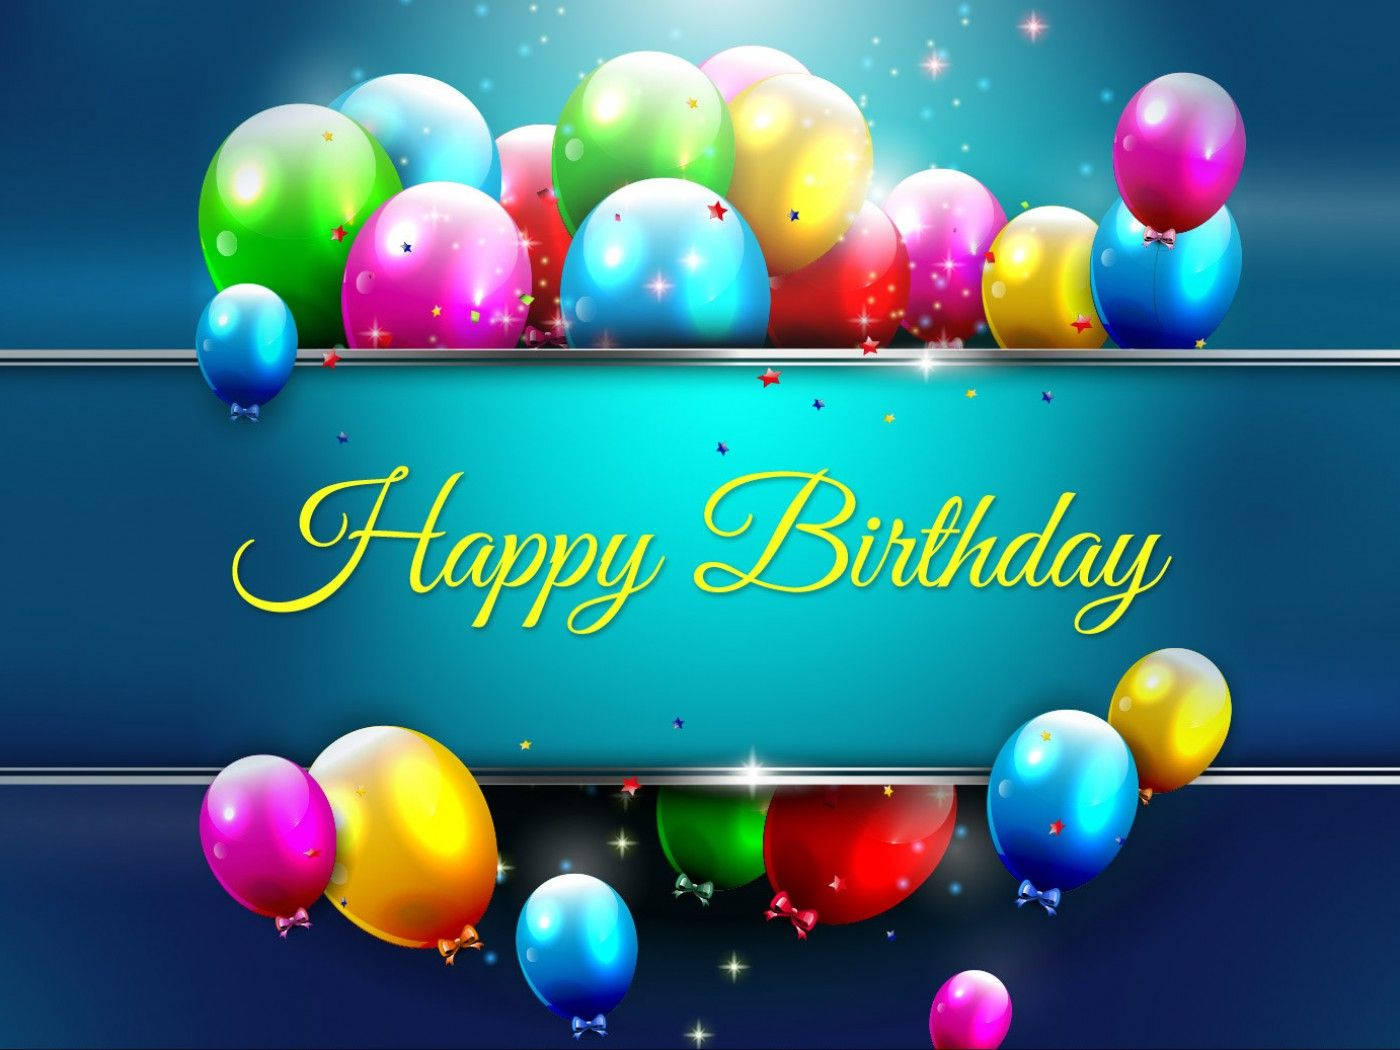 Happy Birthday Greeting In Blue Background